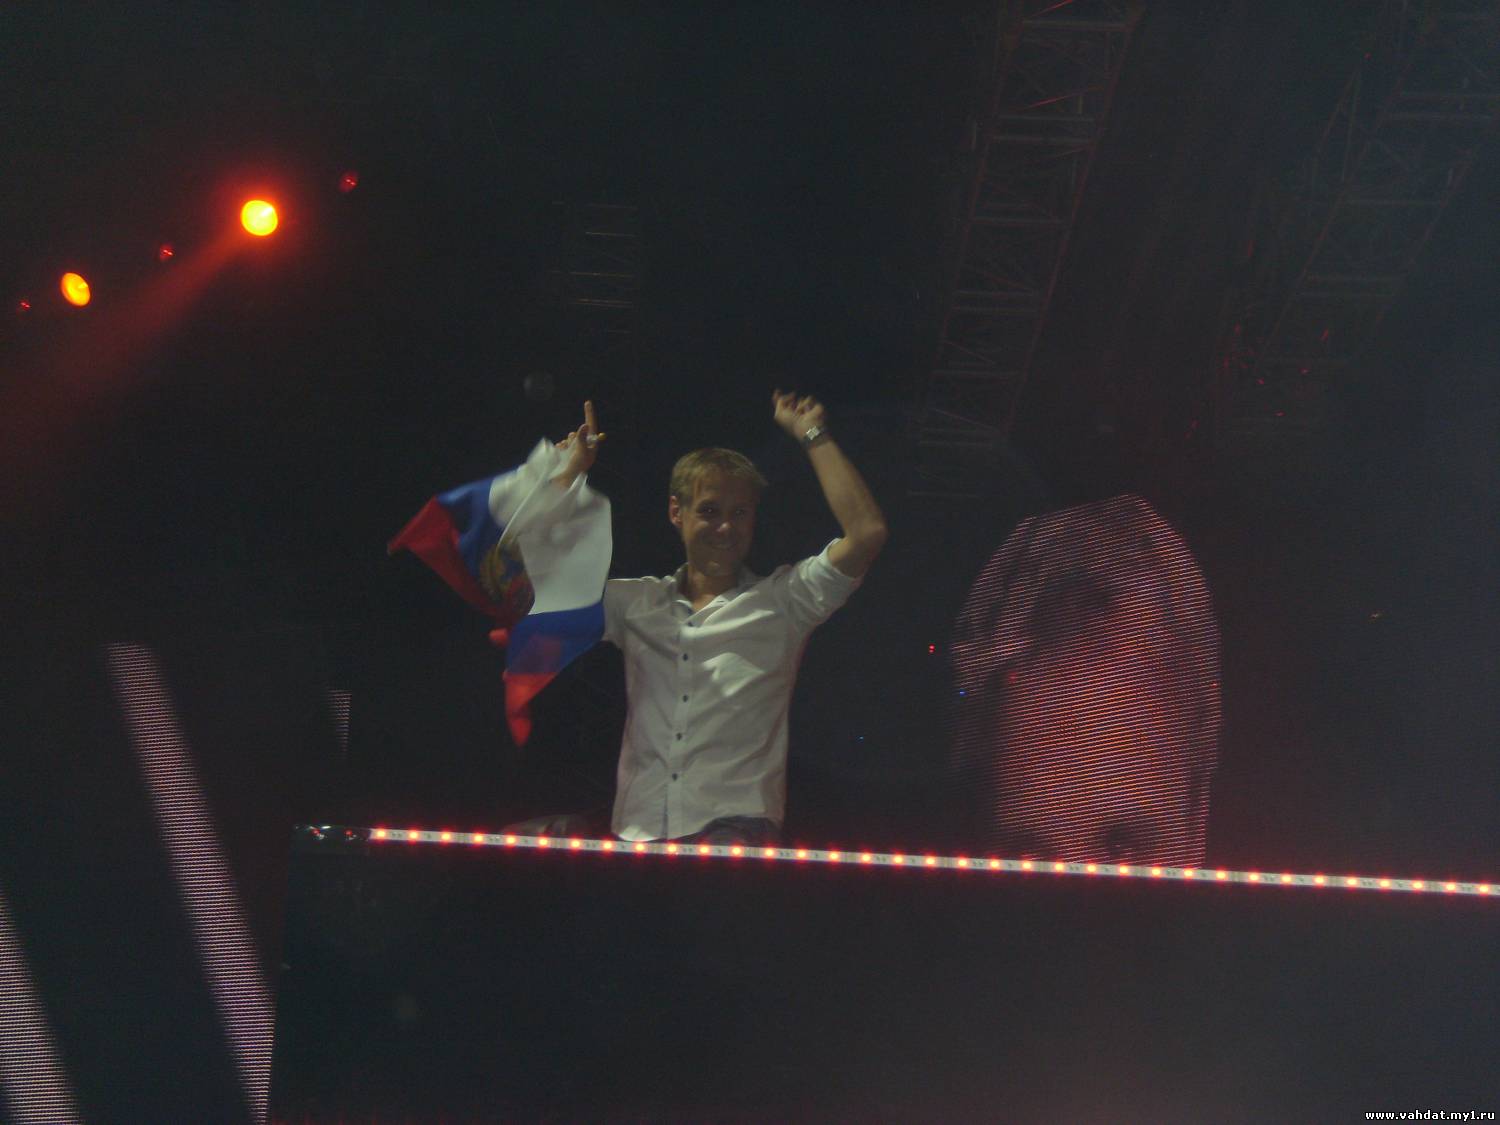 Исполнитель: Armin van Buuren Радиошоу: A State of Trance 496 Стиль: Trance Вышел: 17.02.2011 Качество: 256 кбит/сек. Размер: 222 Мb Композиции: 21 Треклист:01. FUTURE FAVORITE: W&W - AK-47 Acid [Captivating Sounds] 02. Above & Beyond feat. Richard Bedford - Sun & Moon (Club Mix) [Anjunabeats] 03. Faruk Sabanci - Jessica's Sanctuary [Aropa] 04. Tritonal feat. Cristina Soto - Lifted (Mat Zo Remix) [Air Up There Recordings] 05. The Madison - Liquid Sky [Anjunabeats] 06. John O' Callaghan and Audrey Gallagher - Bring Back the Sun (Max Graham and Protoculture remix) [Subculture] 07. Tenishia - The Ones We Left Behind [ASOT] 08. Gareth Emery feat Roxanne Emery - Too Dark Tonight (John O'Callaghan Remix) [Garuda] 09. Craving - Our Tribe [First State Deep] 10. Costa & EDU - Cold State (Original Mix) [Infrasonic] 11. TUNE OF THE WEEK: Agulo feat. David Berkeley - Fire Sign (Suncatcher Remix) [Enhanced] 12. Armin van Buuren pres. Gaia - Status Excessu D (ASOT 500 Theme) [Armind] 13. Filo & Peri with Ronski Speed - Propane [Vandit] 14. Airbase - We Might Fall (Pulser Remix) [Intuition Recordings] 15. Adam Nickey pres. Blue 8 - Livia [Enhanced] 16. Hodel & Anguilla Project - Emerald [Infrasonic] 17. Alejandro Yanni - Compressed Progress (Tomas Heredia Remix) [Istmo Music] 18. Sequentia - Gone Missing (Nitrous Oxide Remix) [Infrasonic] 19. Bjorn Akesson - Painting Pyramids [FSOE] 20. Binary Finary and Trent McDermott - Freedom Seekers (Arctic Moon Remix) [Insight Recordings] 21. ASOT Radio Classic: Super 8 - Alba [Anjunabeats] Скачать Альбом Armin Van Buuren - A State of Trance 496 Бесплатно Armin Van Buuren - A State of Trance 496 Скачать Armin Van Buuren 2011 Альбом A State of Trance 496 Скачать|Download Armin van Buuren - A State of Trance 496 (2011).rar